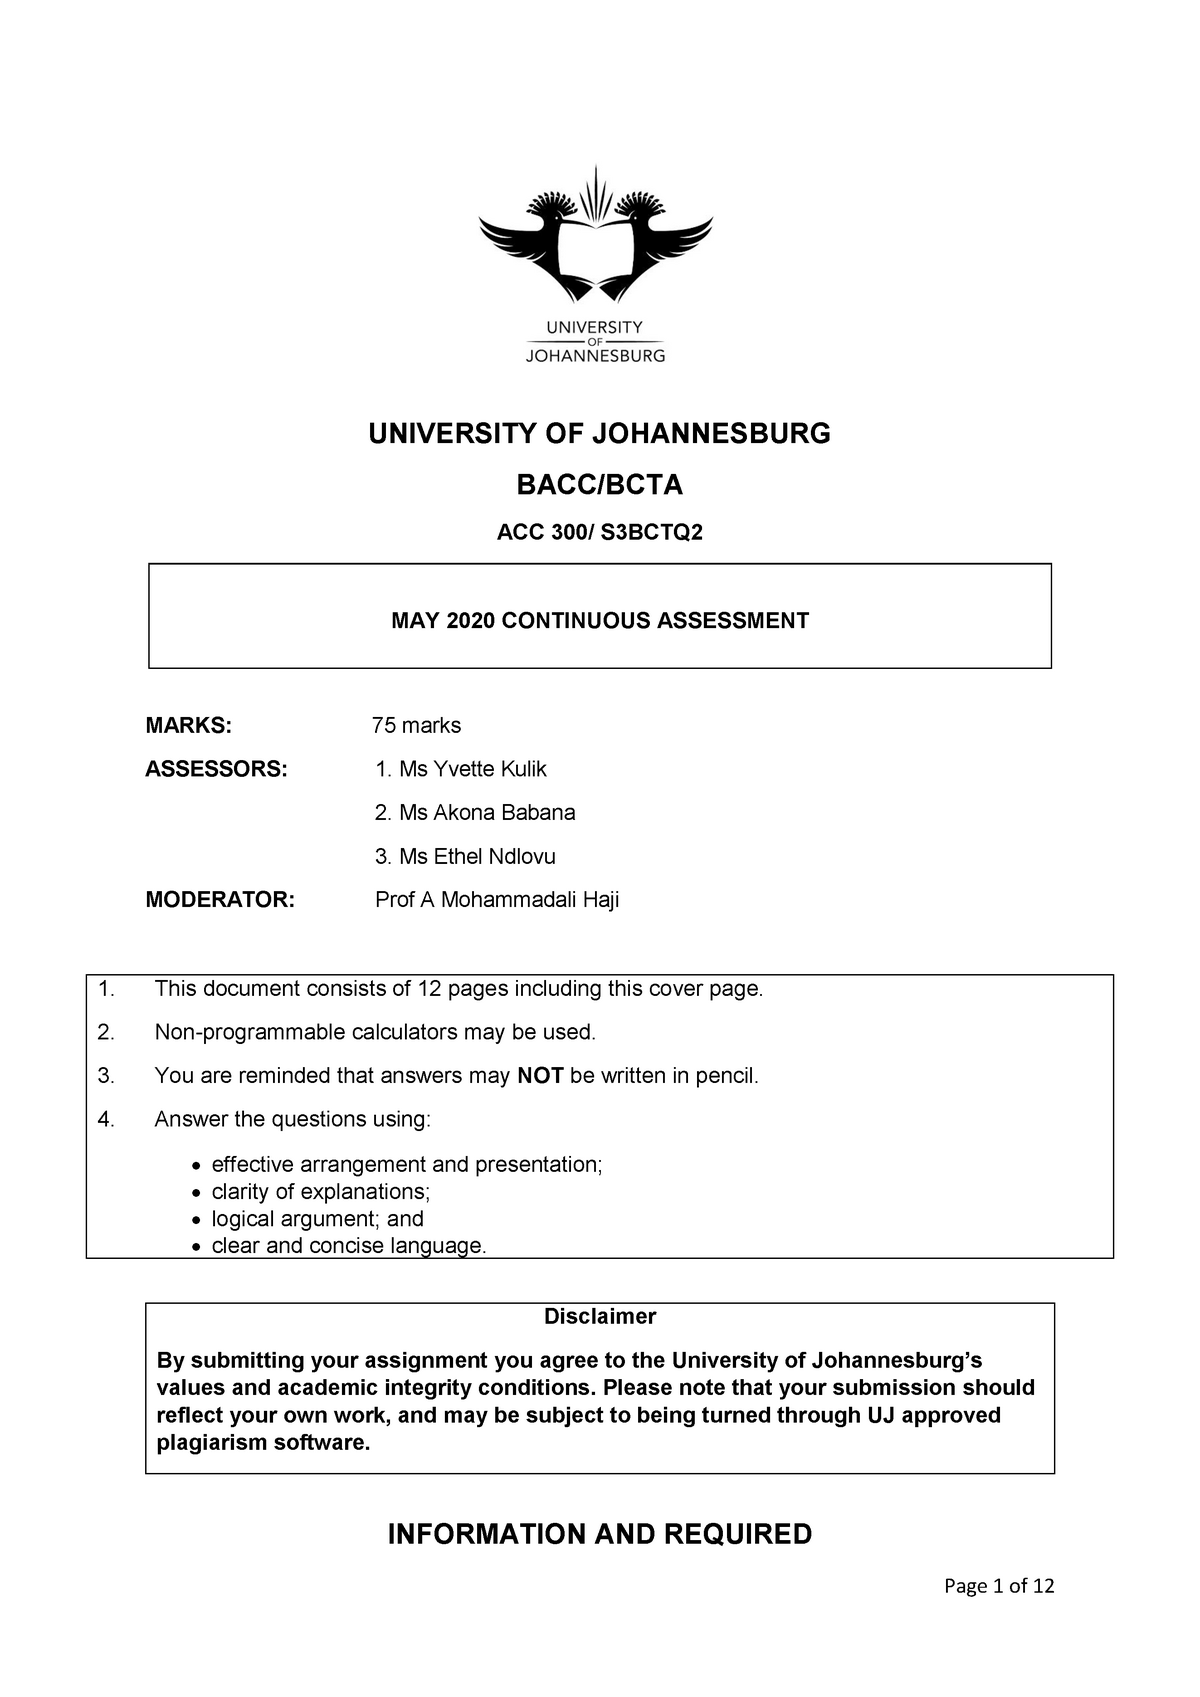 university of johannesburg assignment cover page